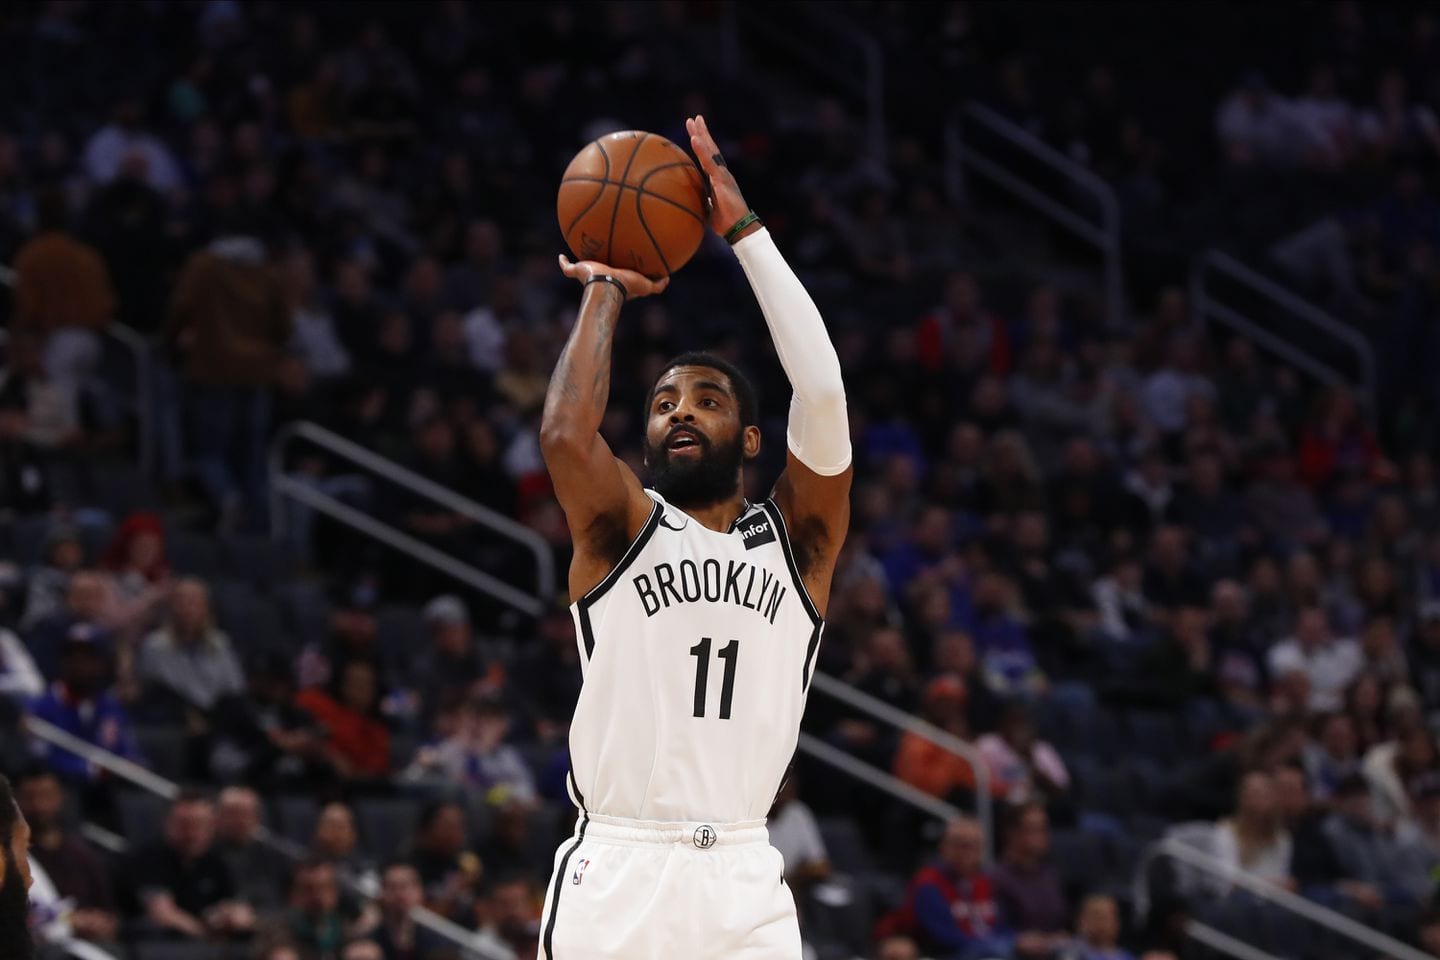 Forget Disney, Kyrie Irving Wants To Start a Brand New League